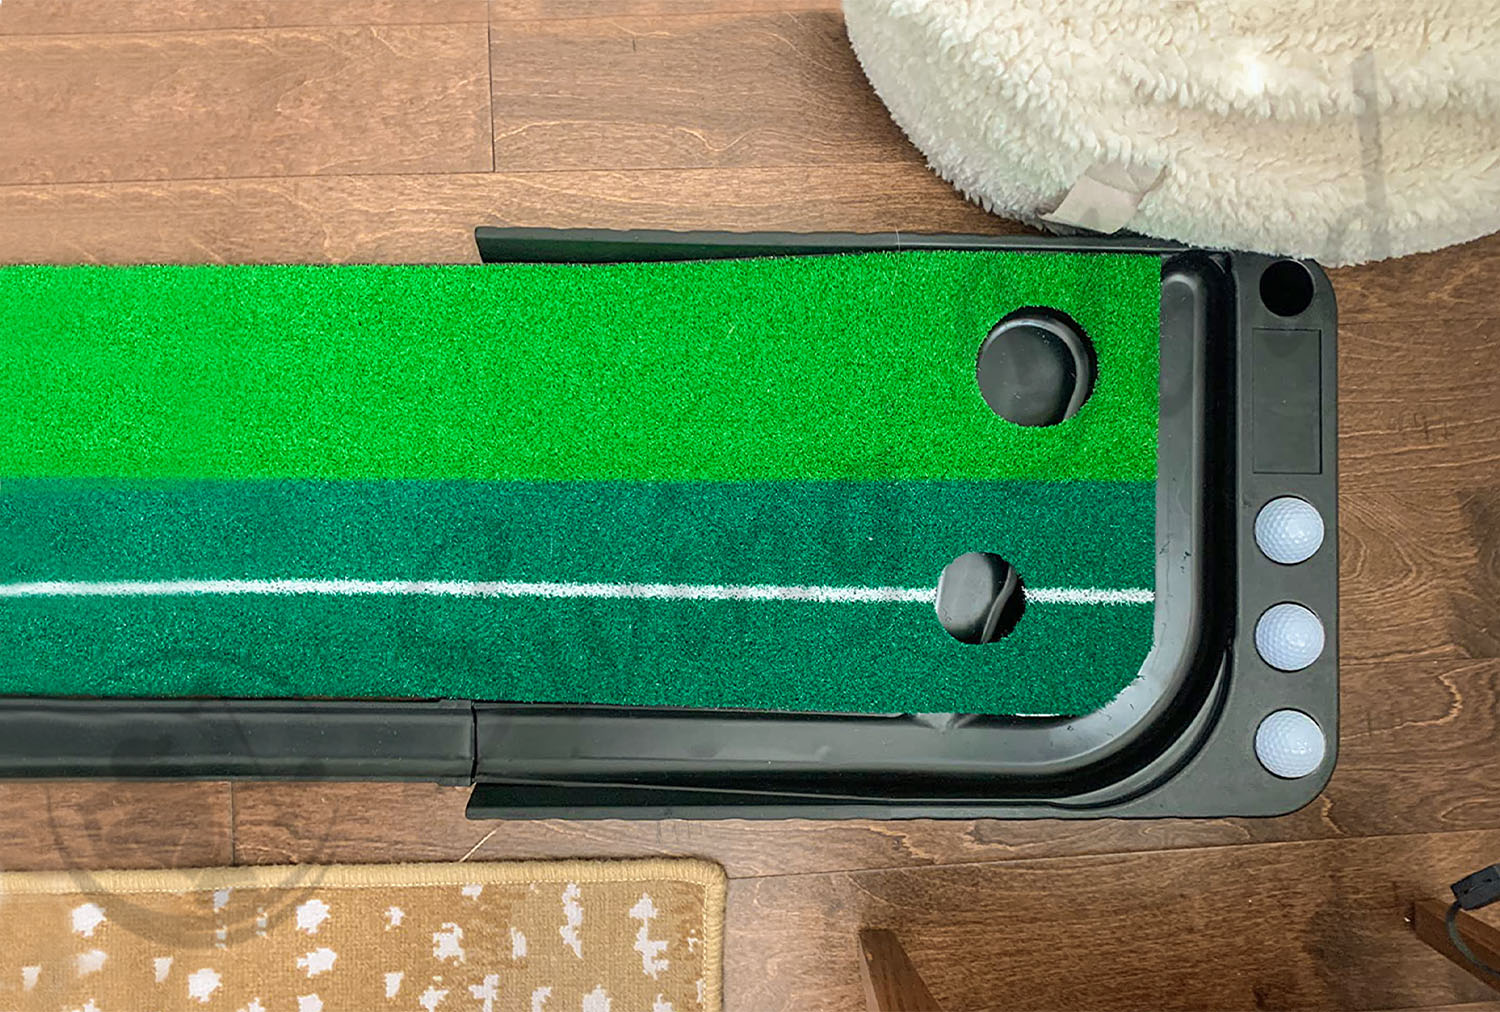 Close up of the Abco Tech Indoor Putting Set